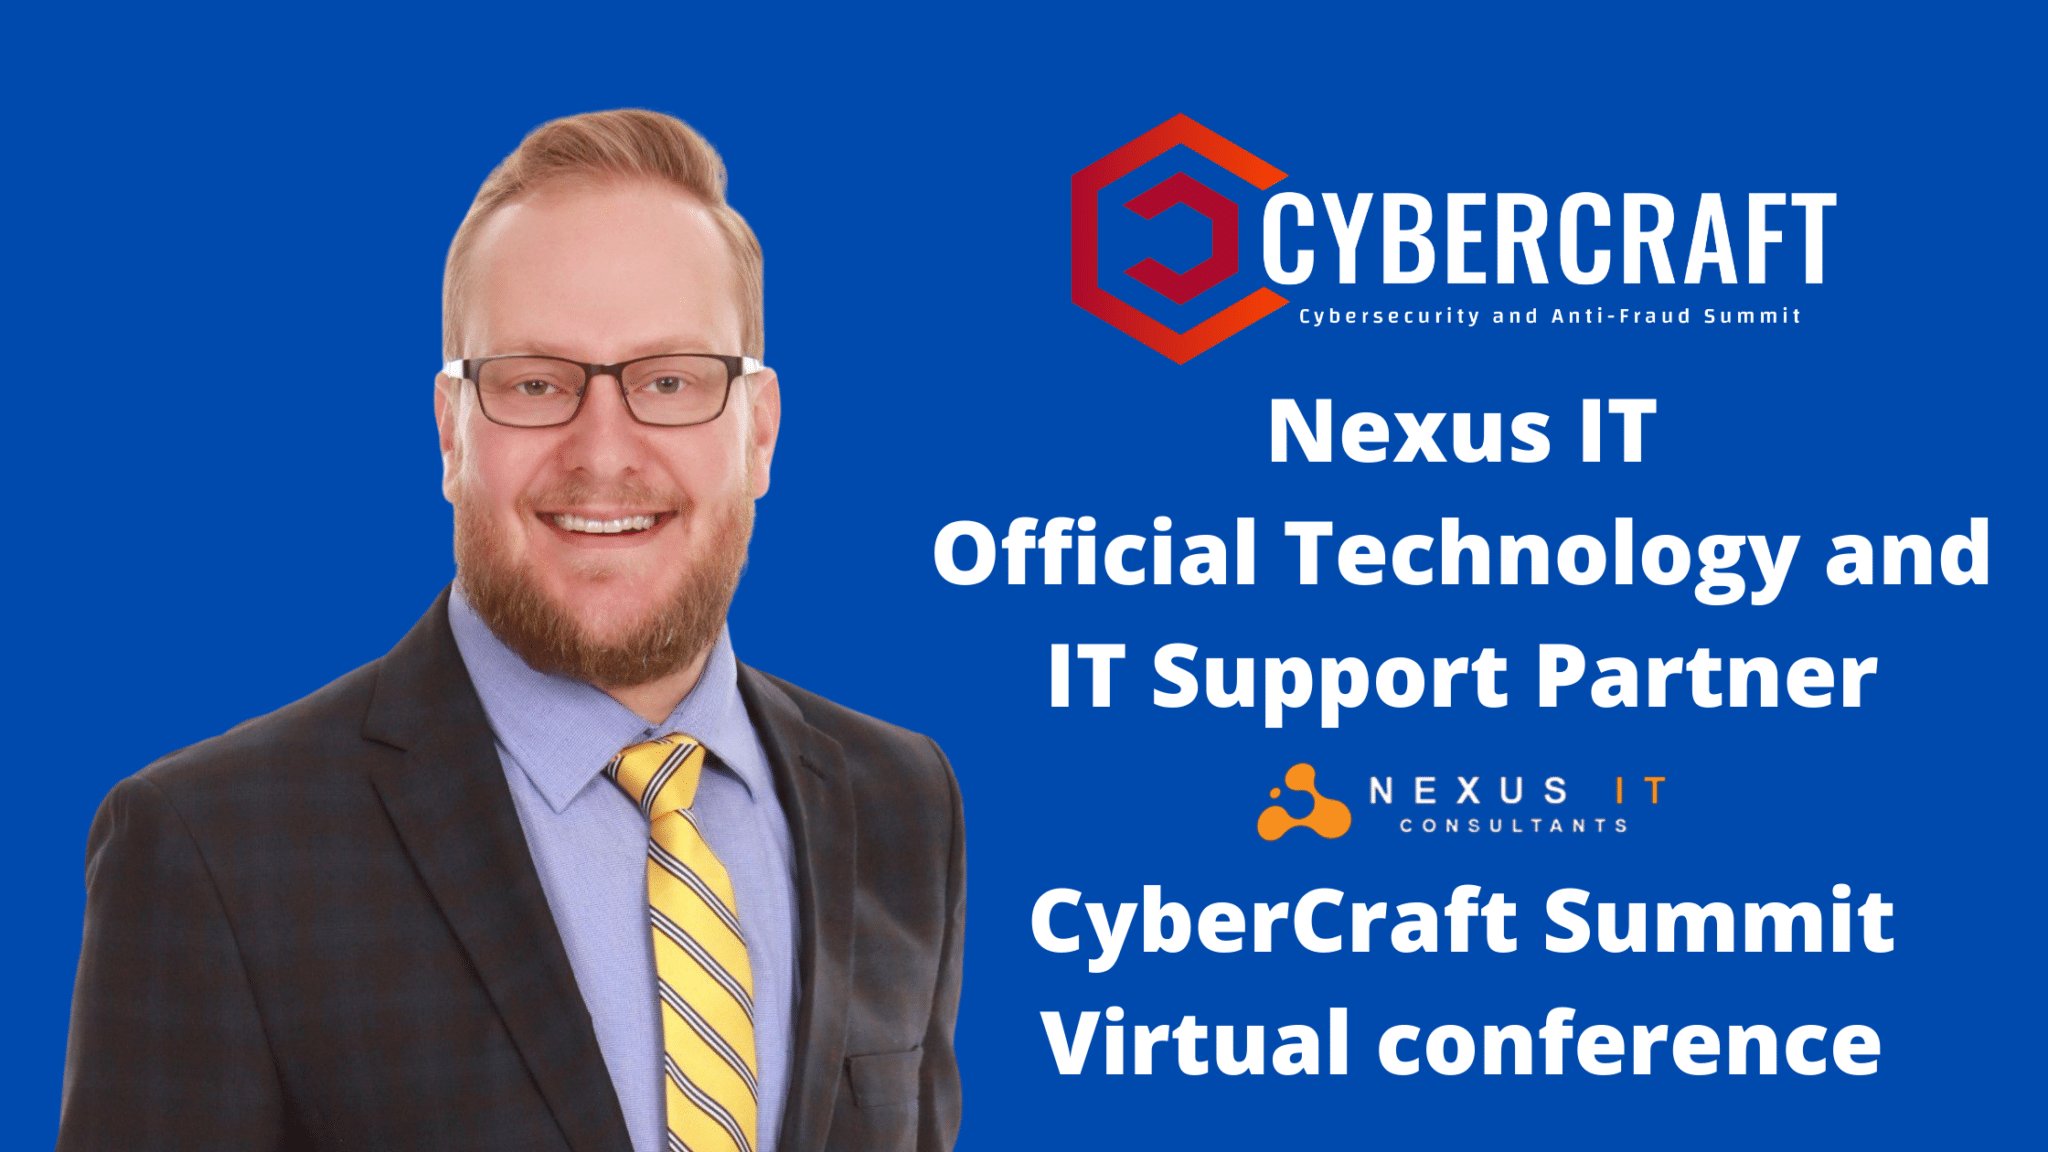 Nexus IT Official Technology and IT Support Partner CyberCraft Summit Virtual conference